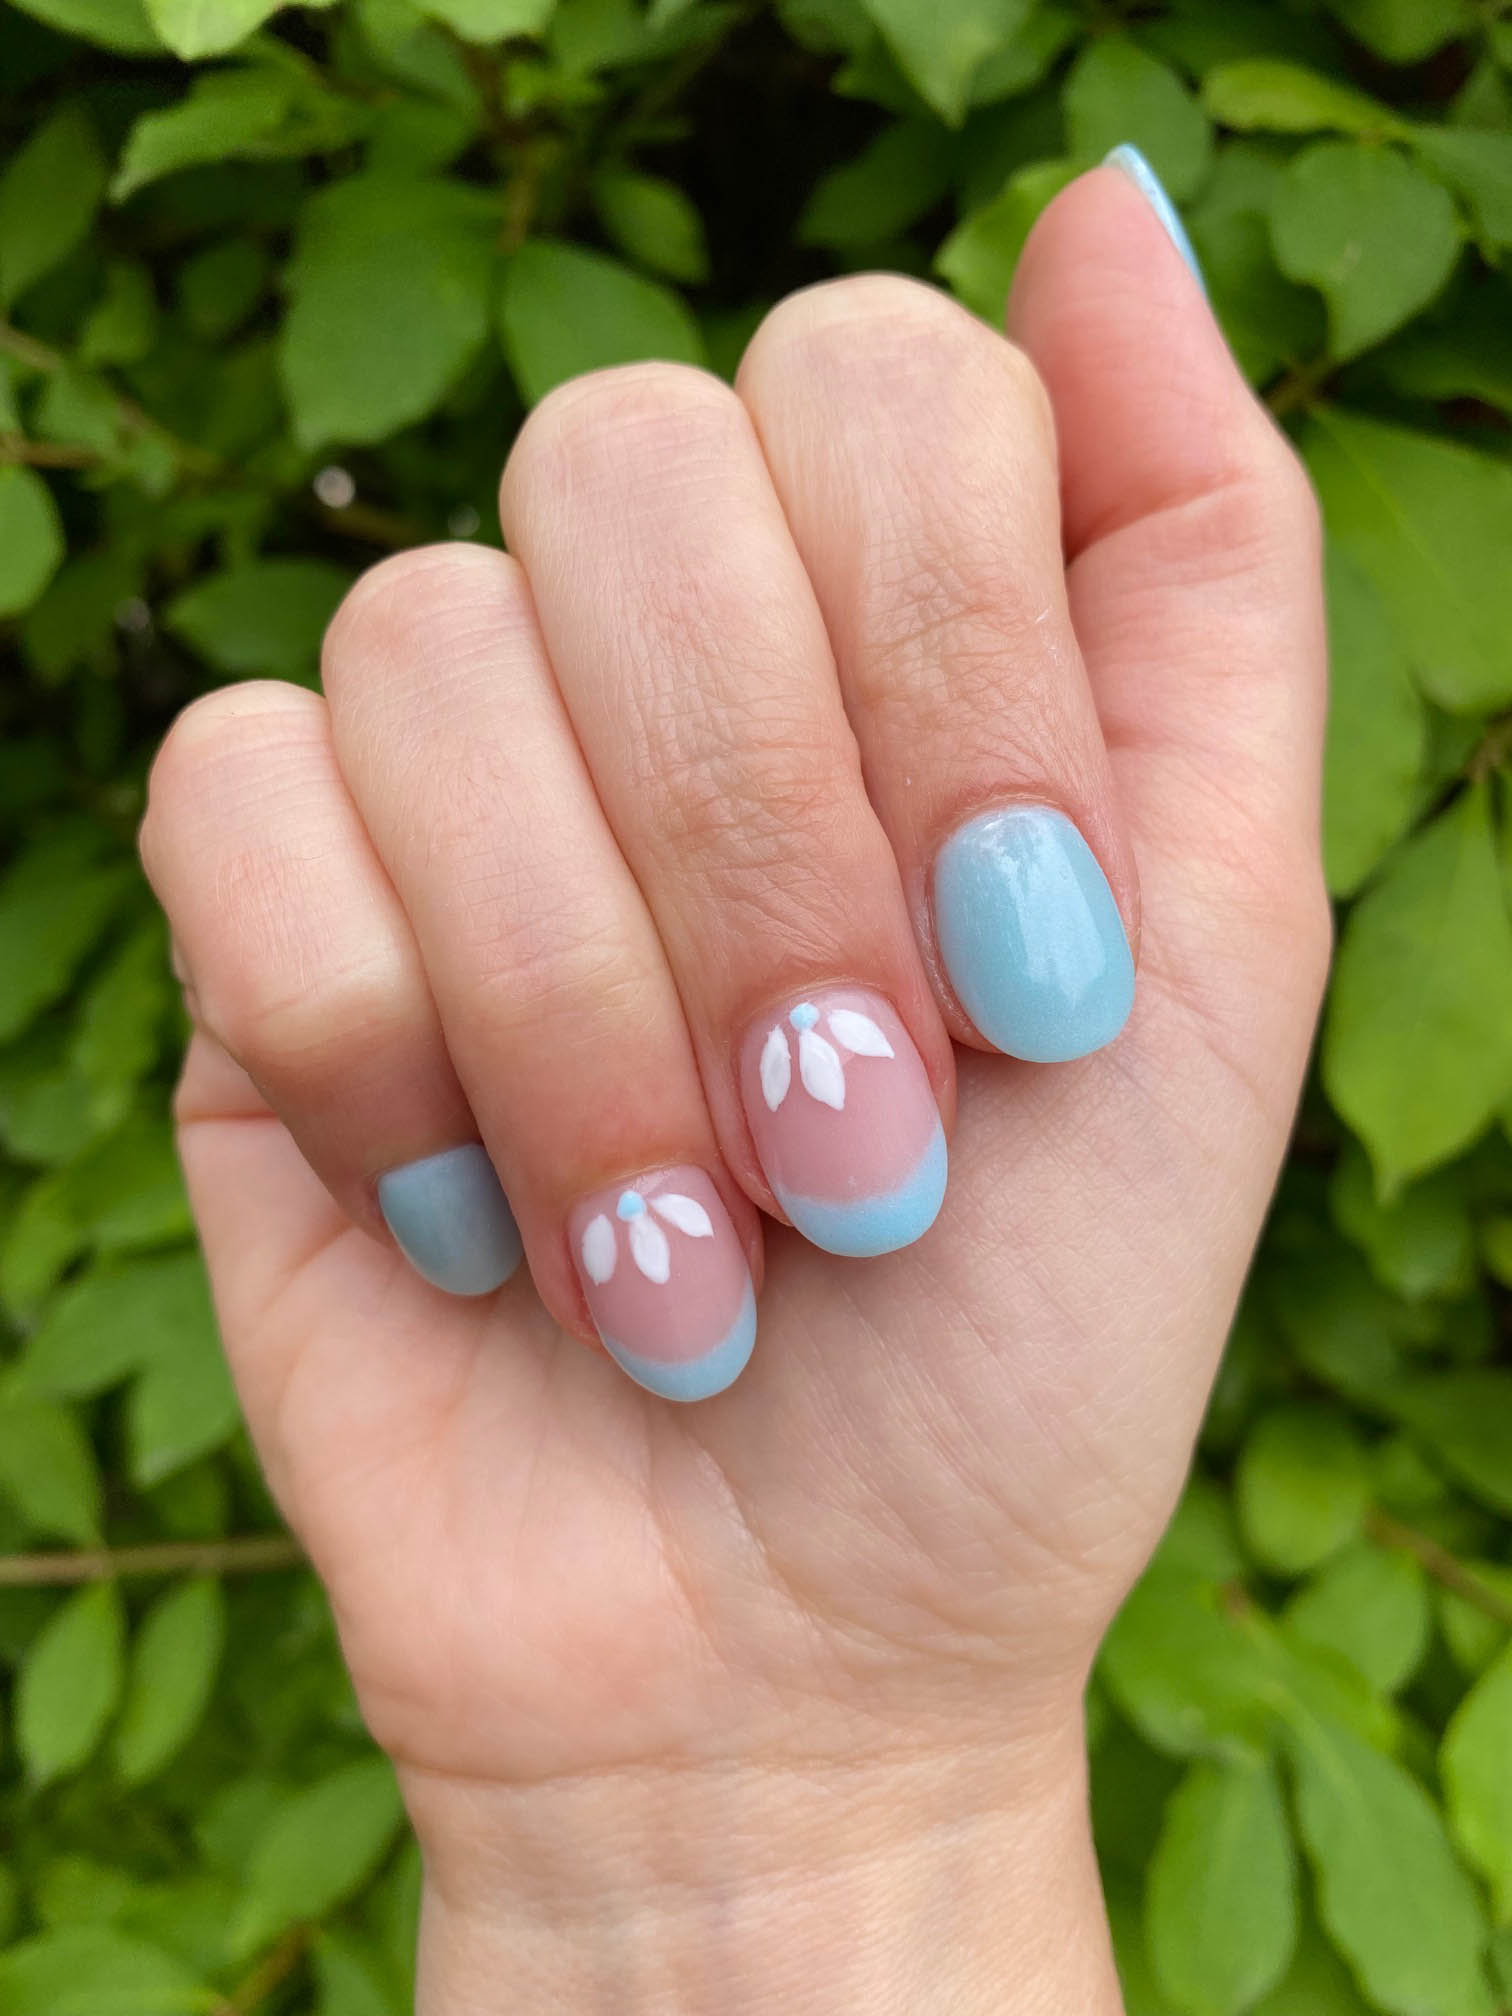 Lotus Flower Nail Design Blue And White Manicure Ideas